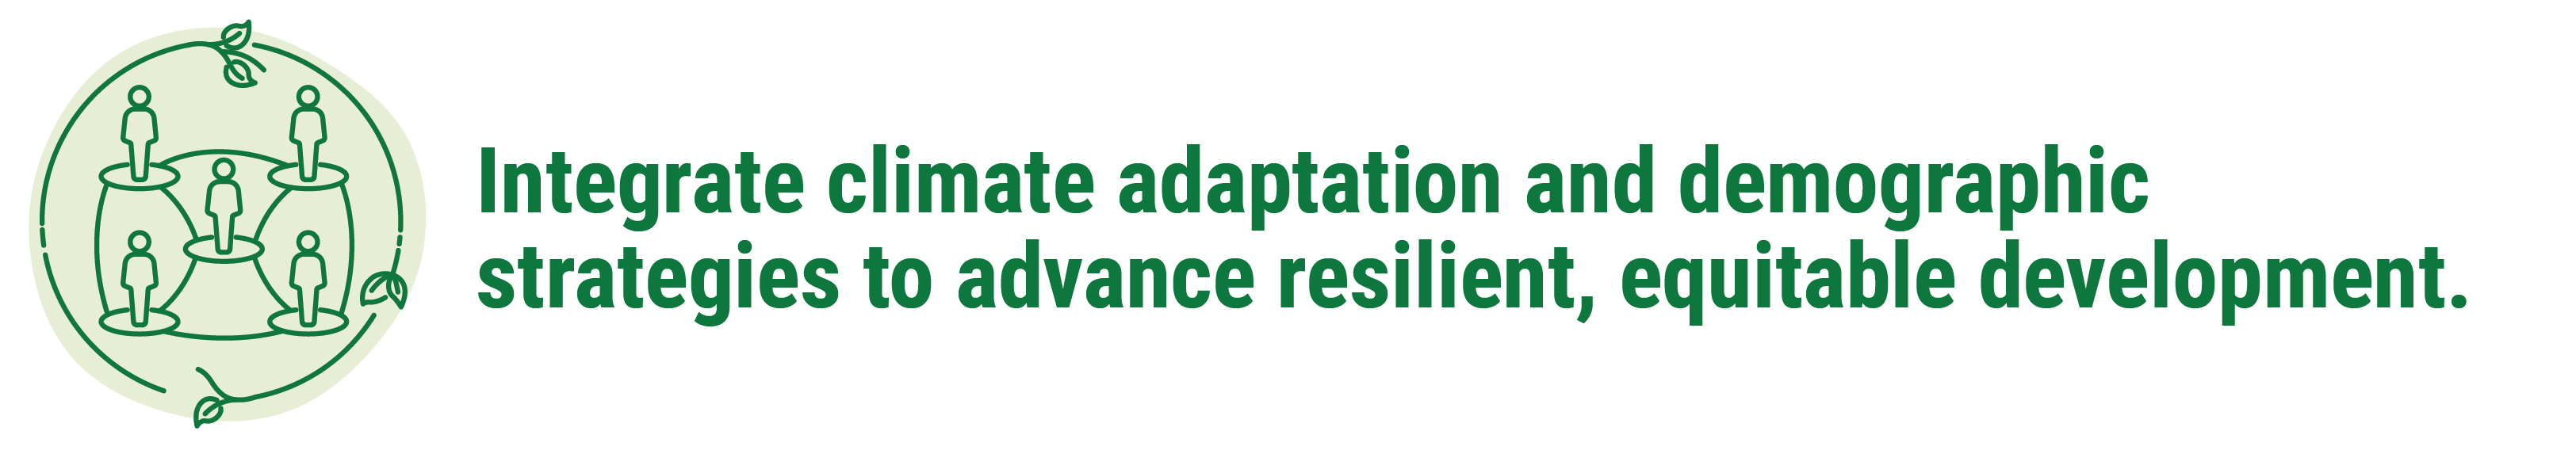 Integrate climate adaptation and demographic strategies to advance resilient, equitable development